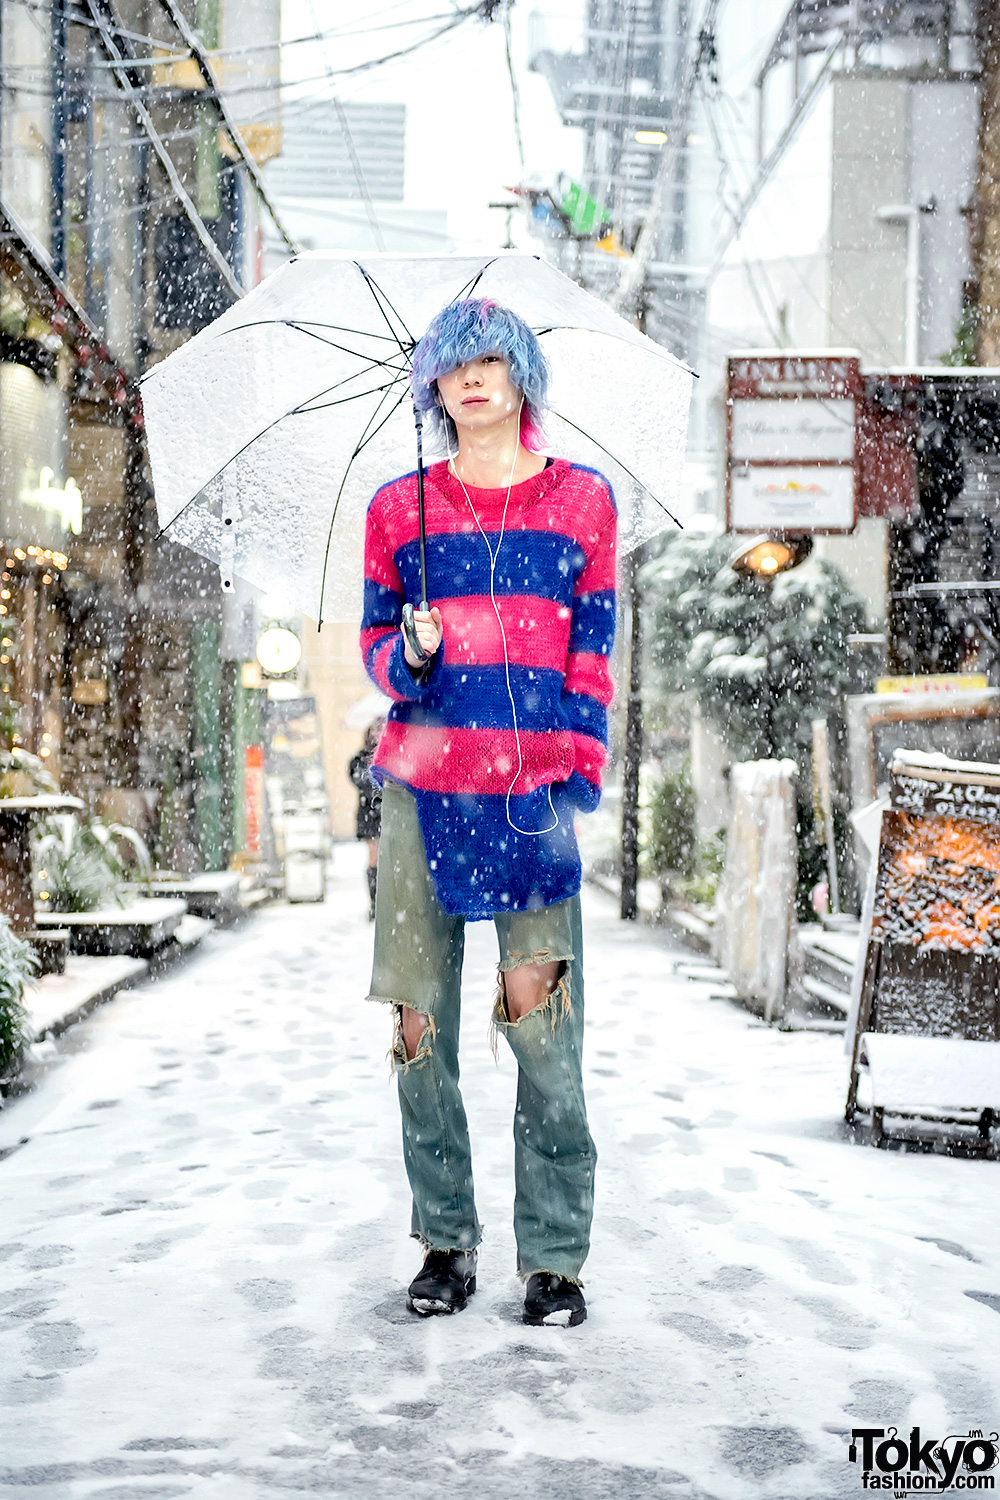 Snowy Harajuku Street Style w/ Blue-Pink Hair, Nincompoop Capacity Sweater, Levi's & Dr. Martens